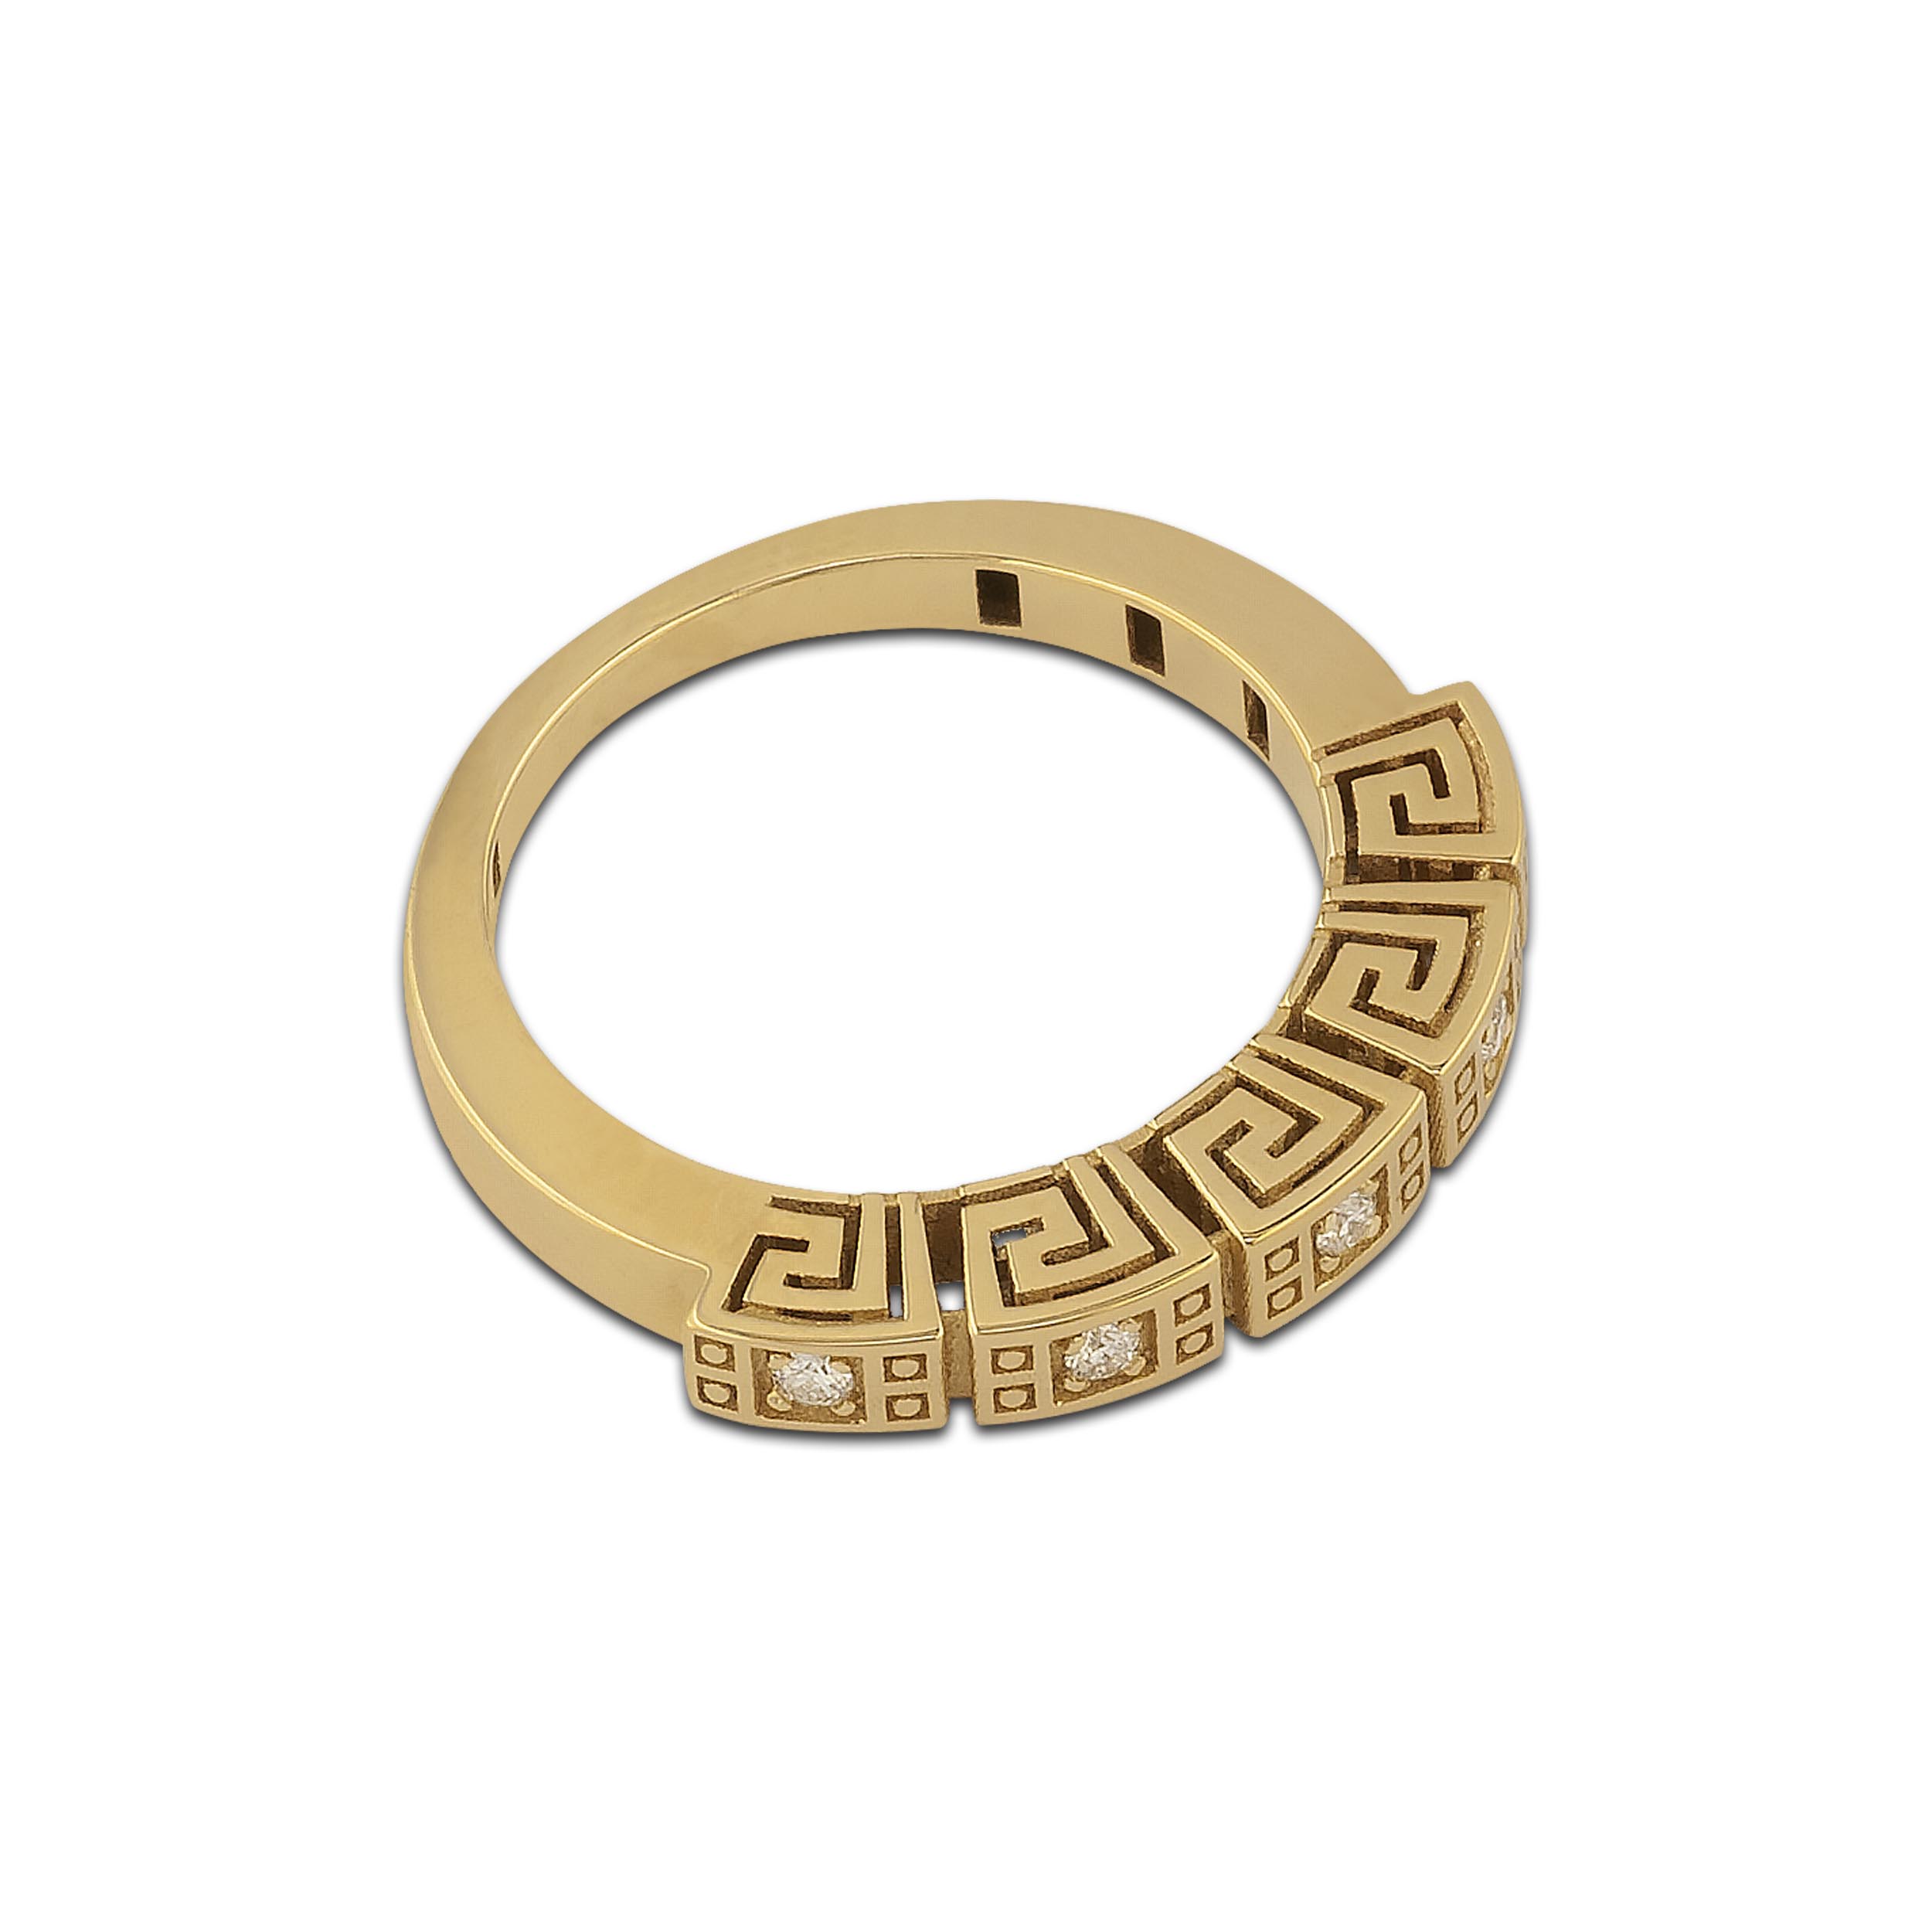 Fivefold Meander gold Ring with diamonds